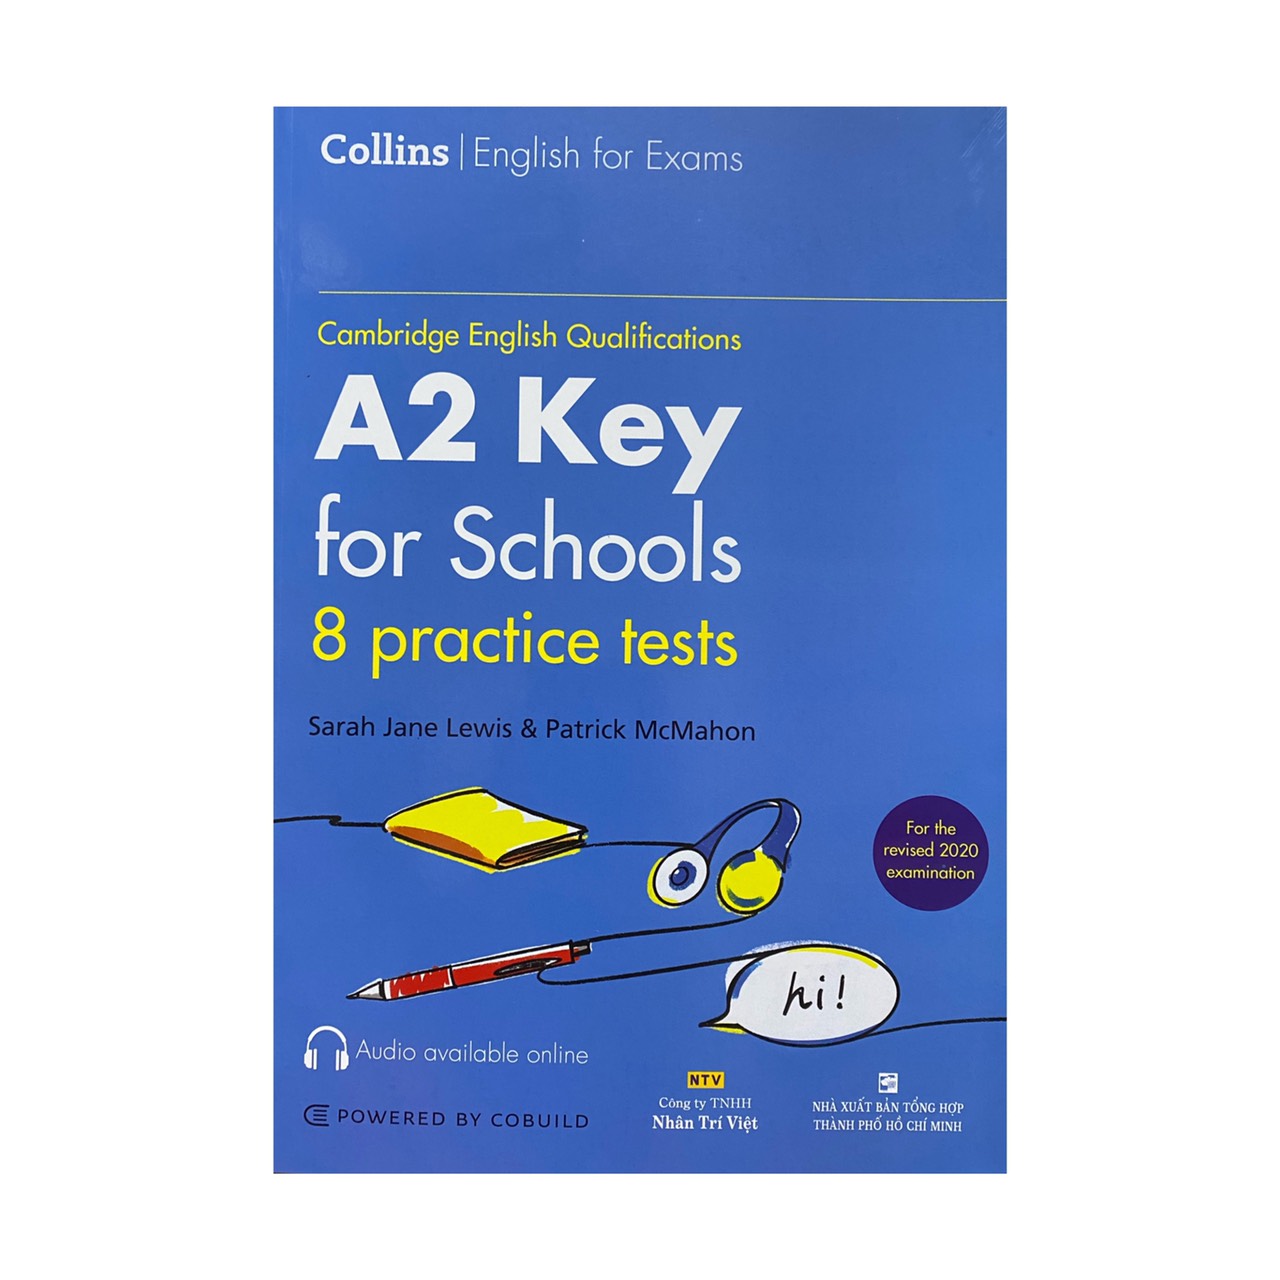 Sách-Collins English for exams Cambridge English Qualifications A2 Key for